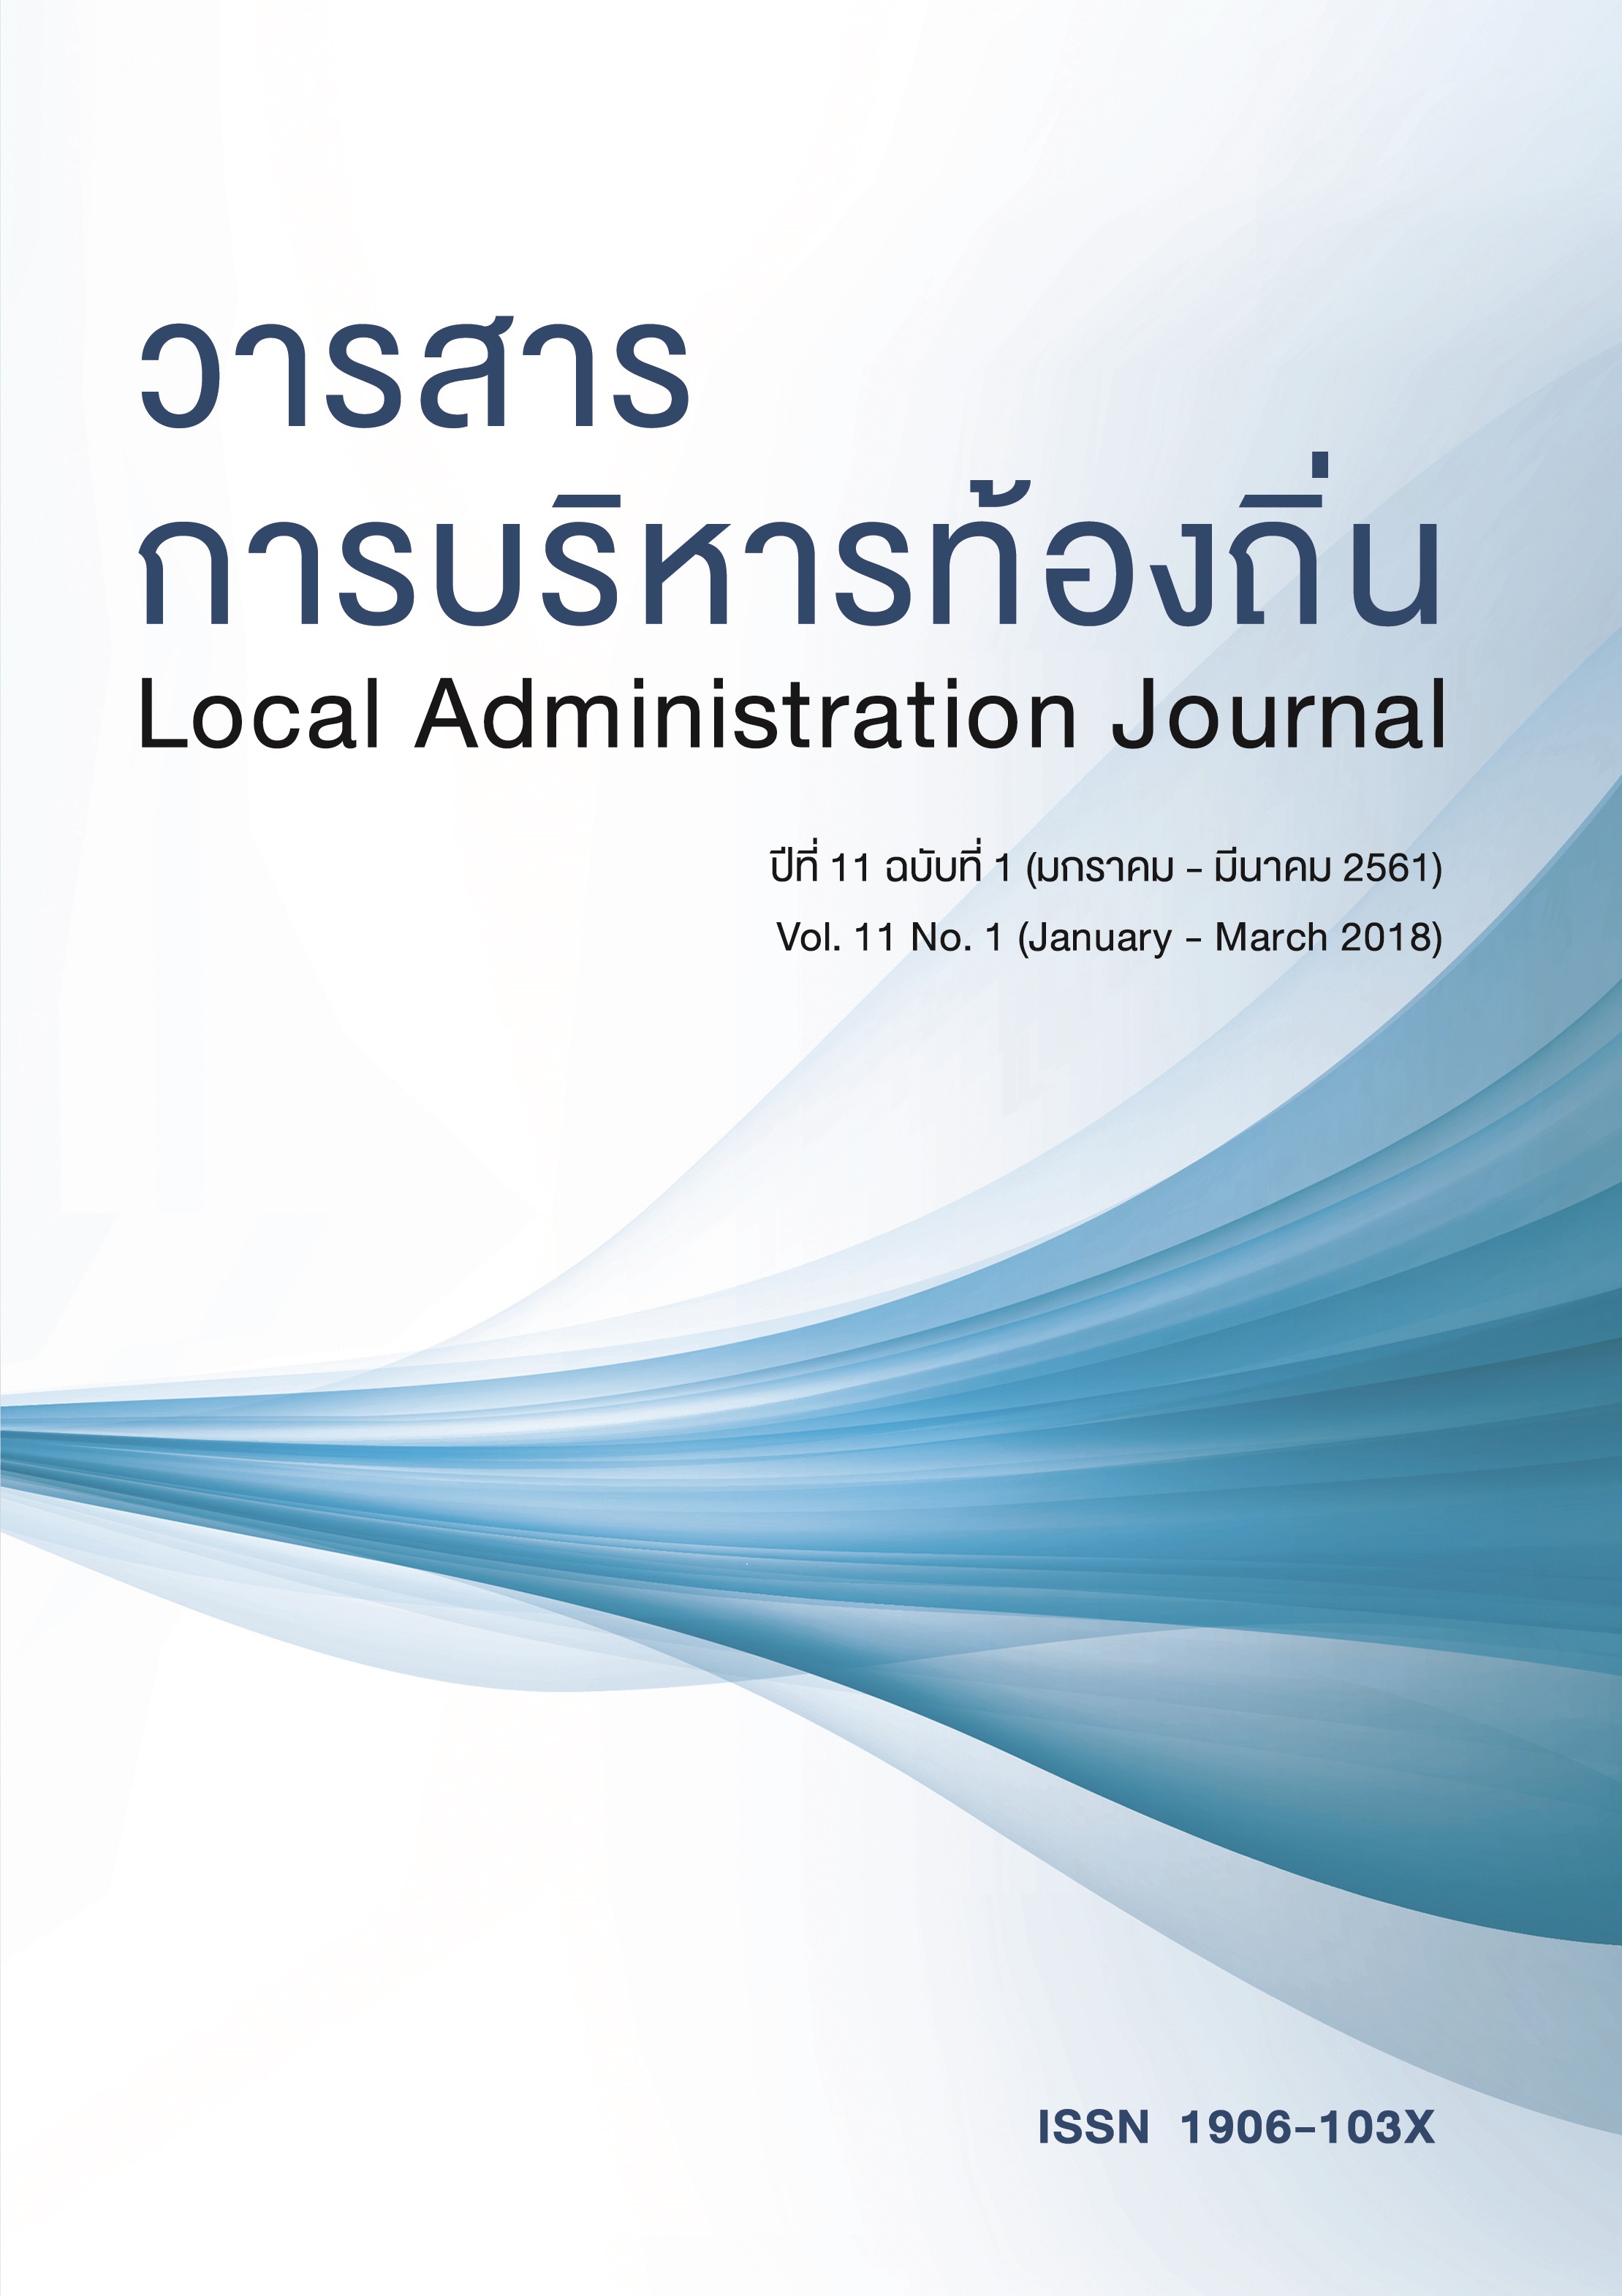 					View Vol. 11 No. 1 (2018): Local Administration Journal
				